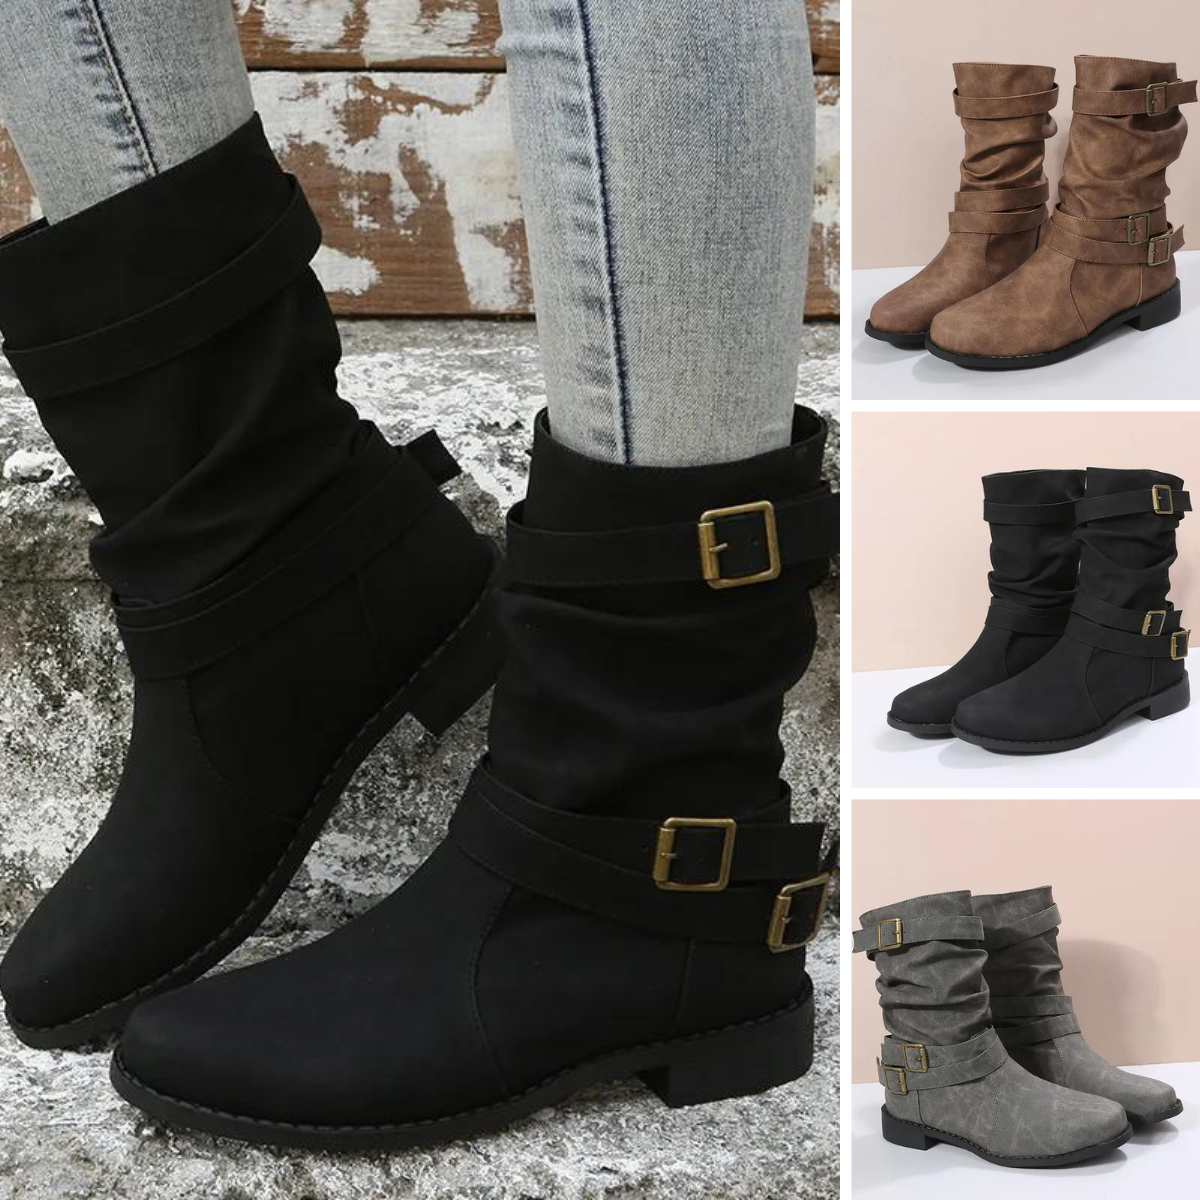 Cilly - The new fashion round toe with metal ornament ankle boot